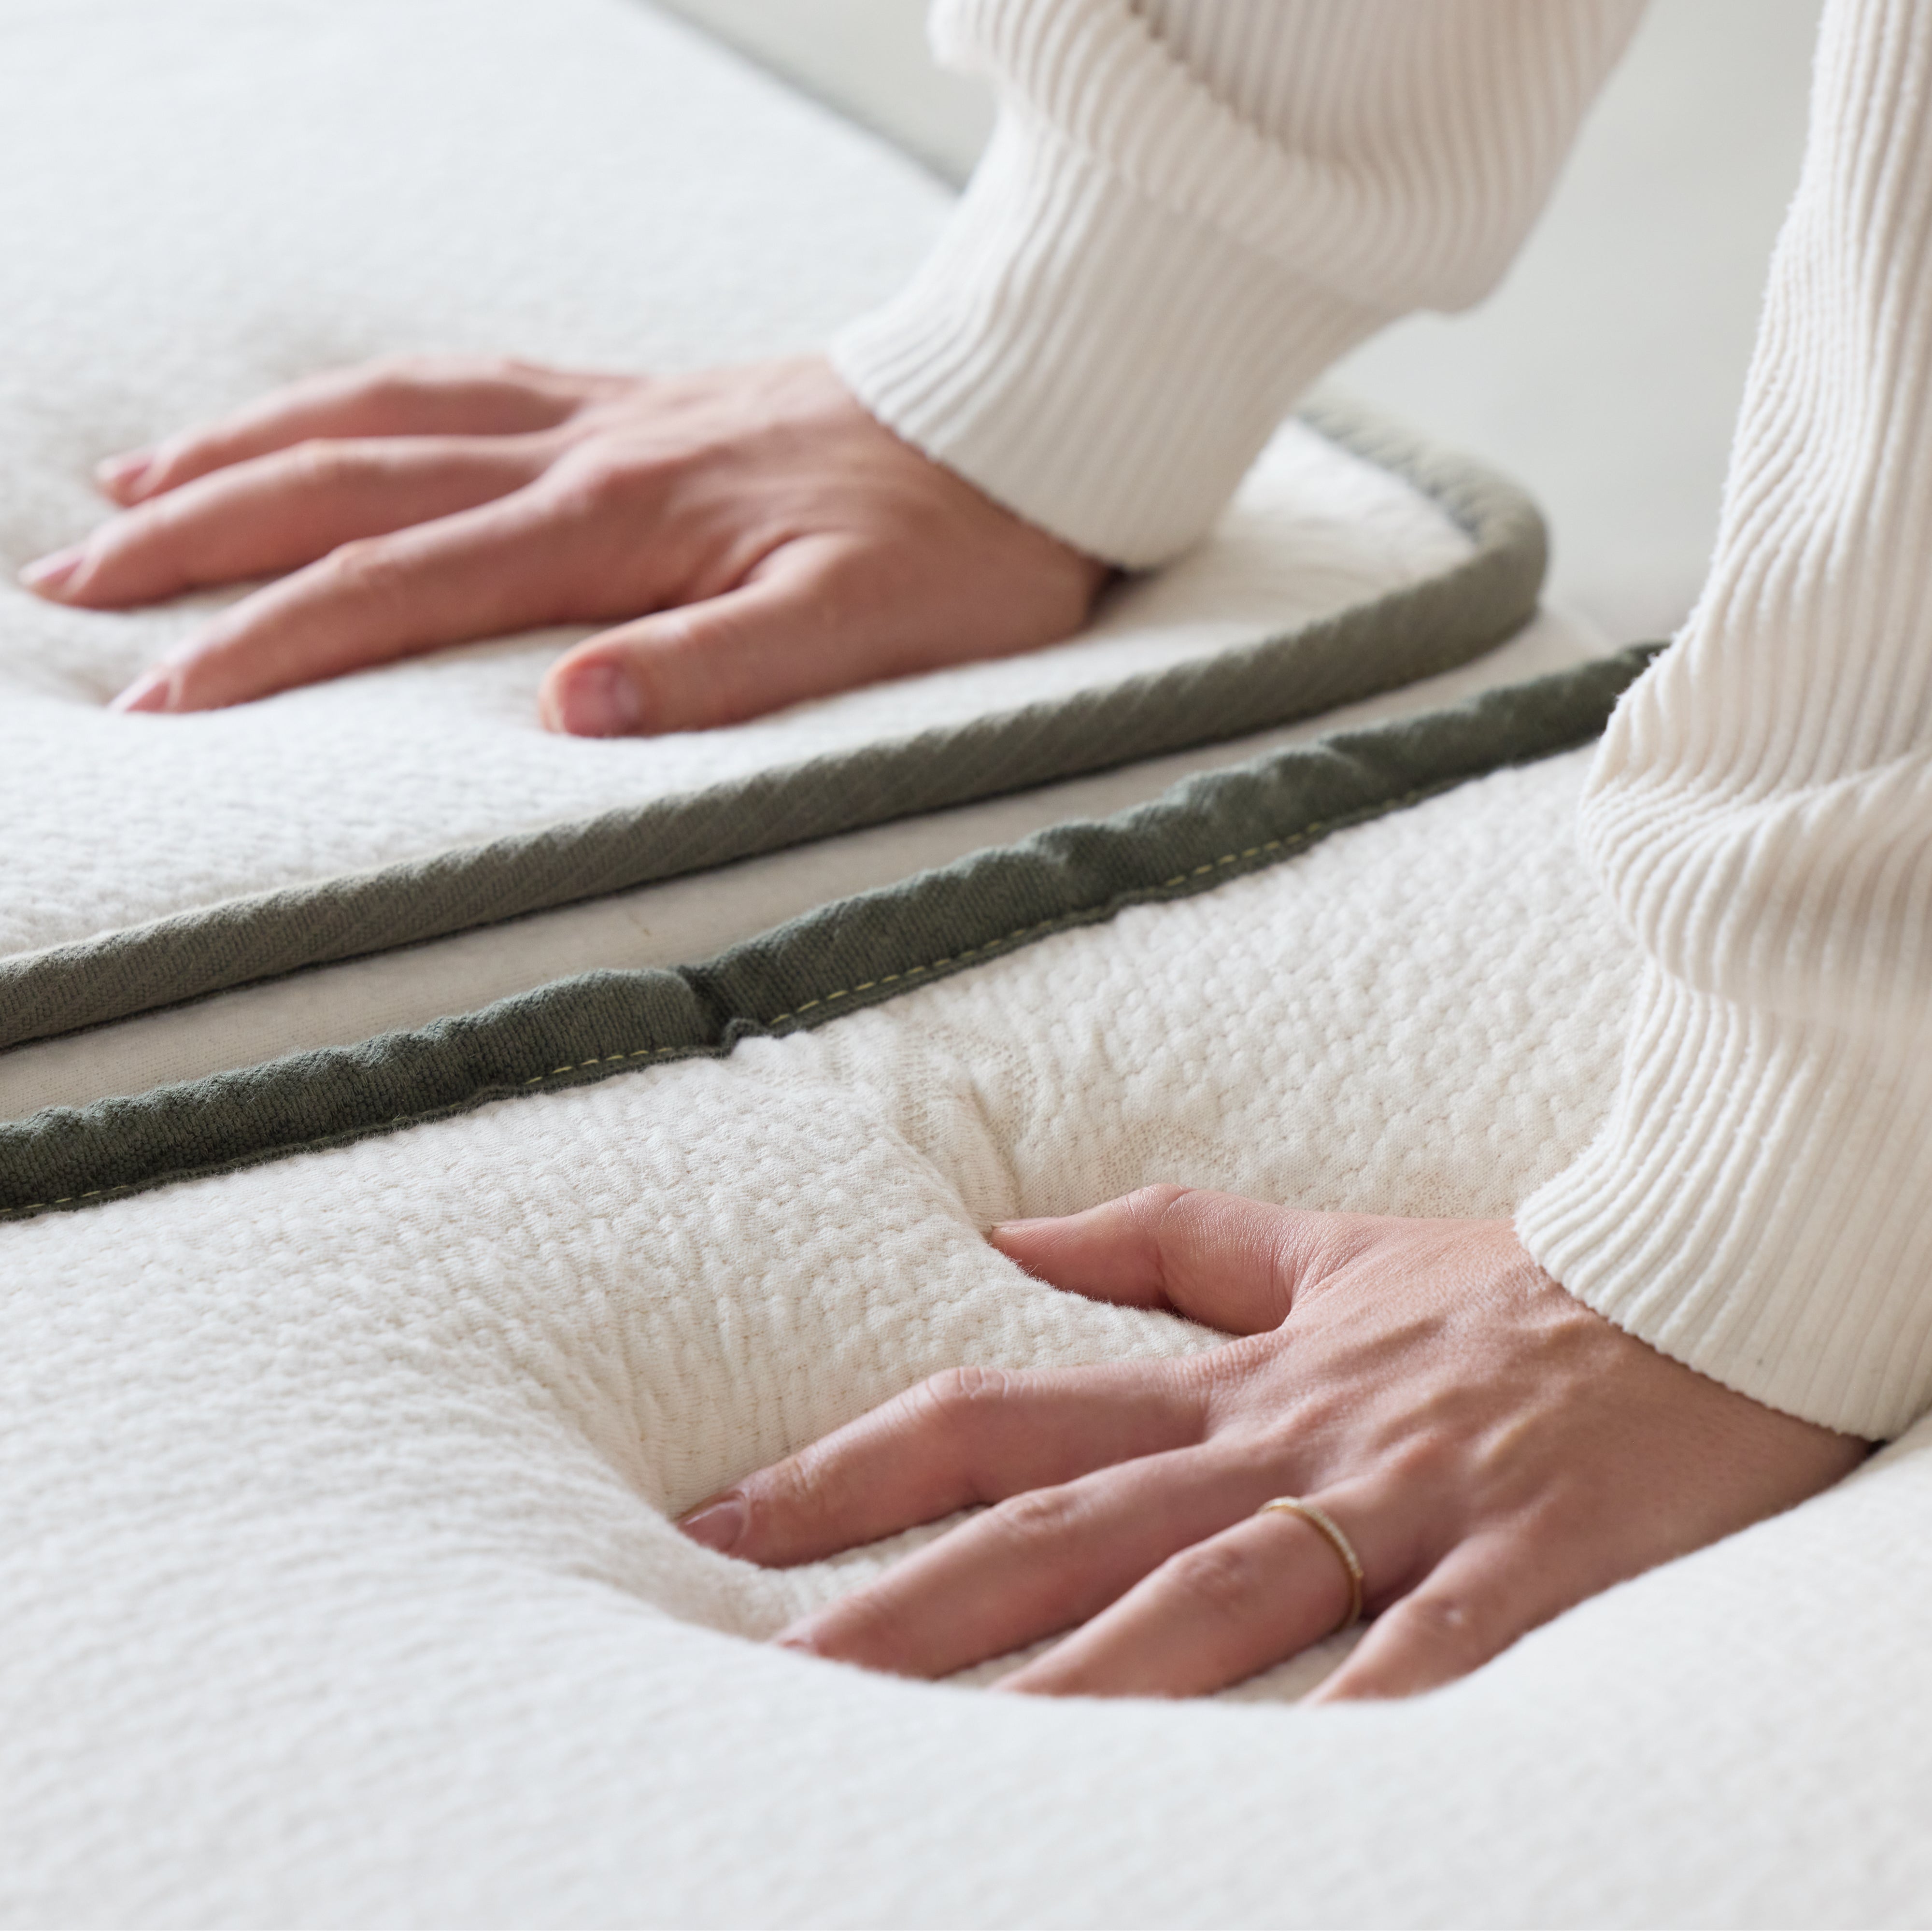 Mattress Toppers for Better Sleep: Are They Worth It?